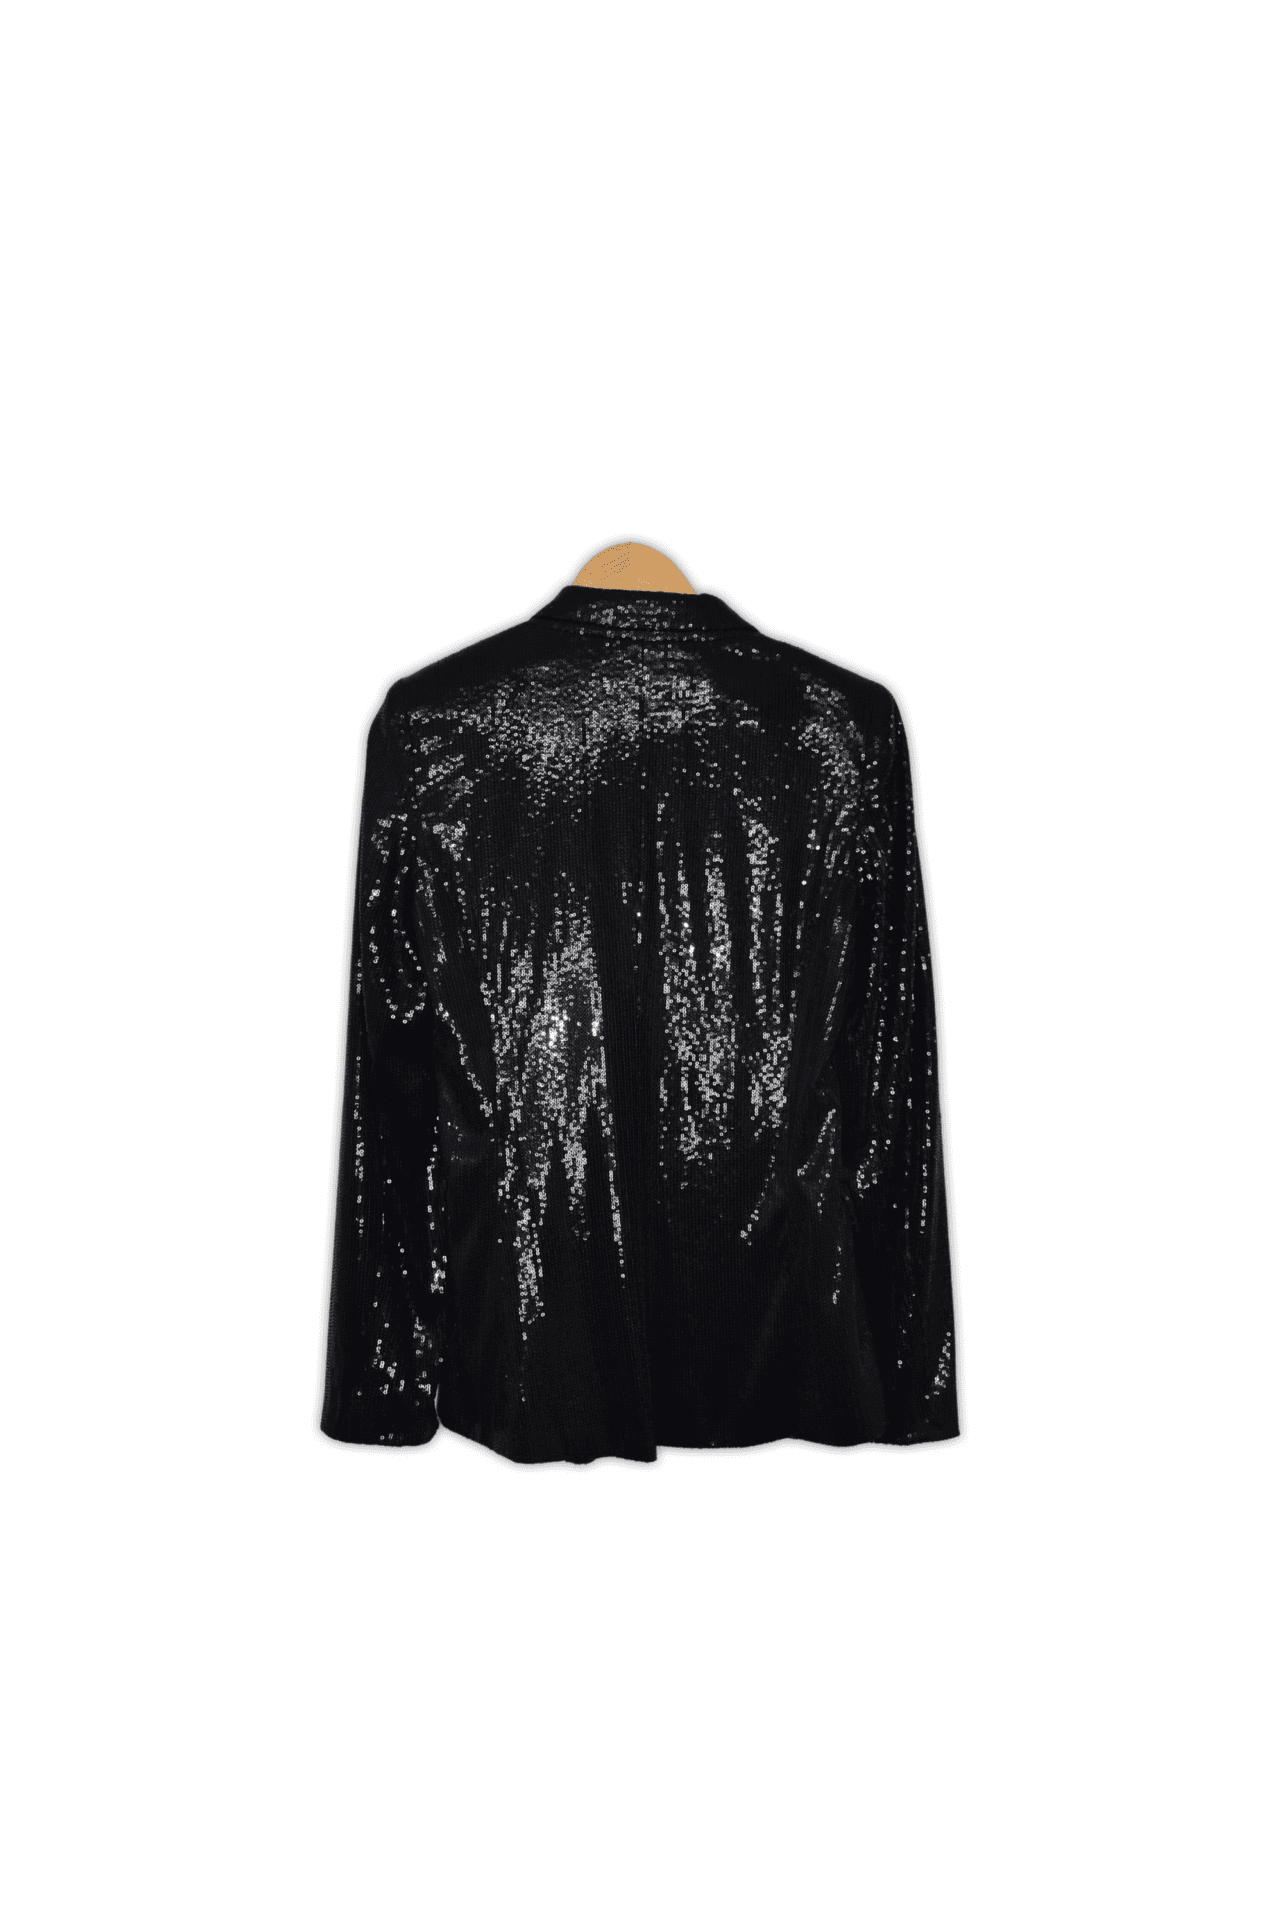 XS, Black Sequin. Classic blazer featuring a slim lapel and collar, two front single jetted pocked with flaps, long sleeves and a front button closure.